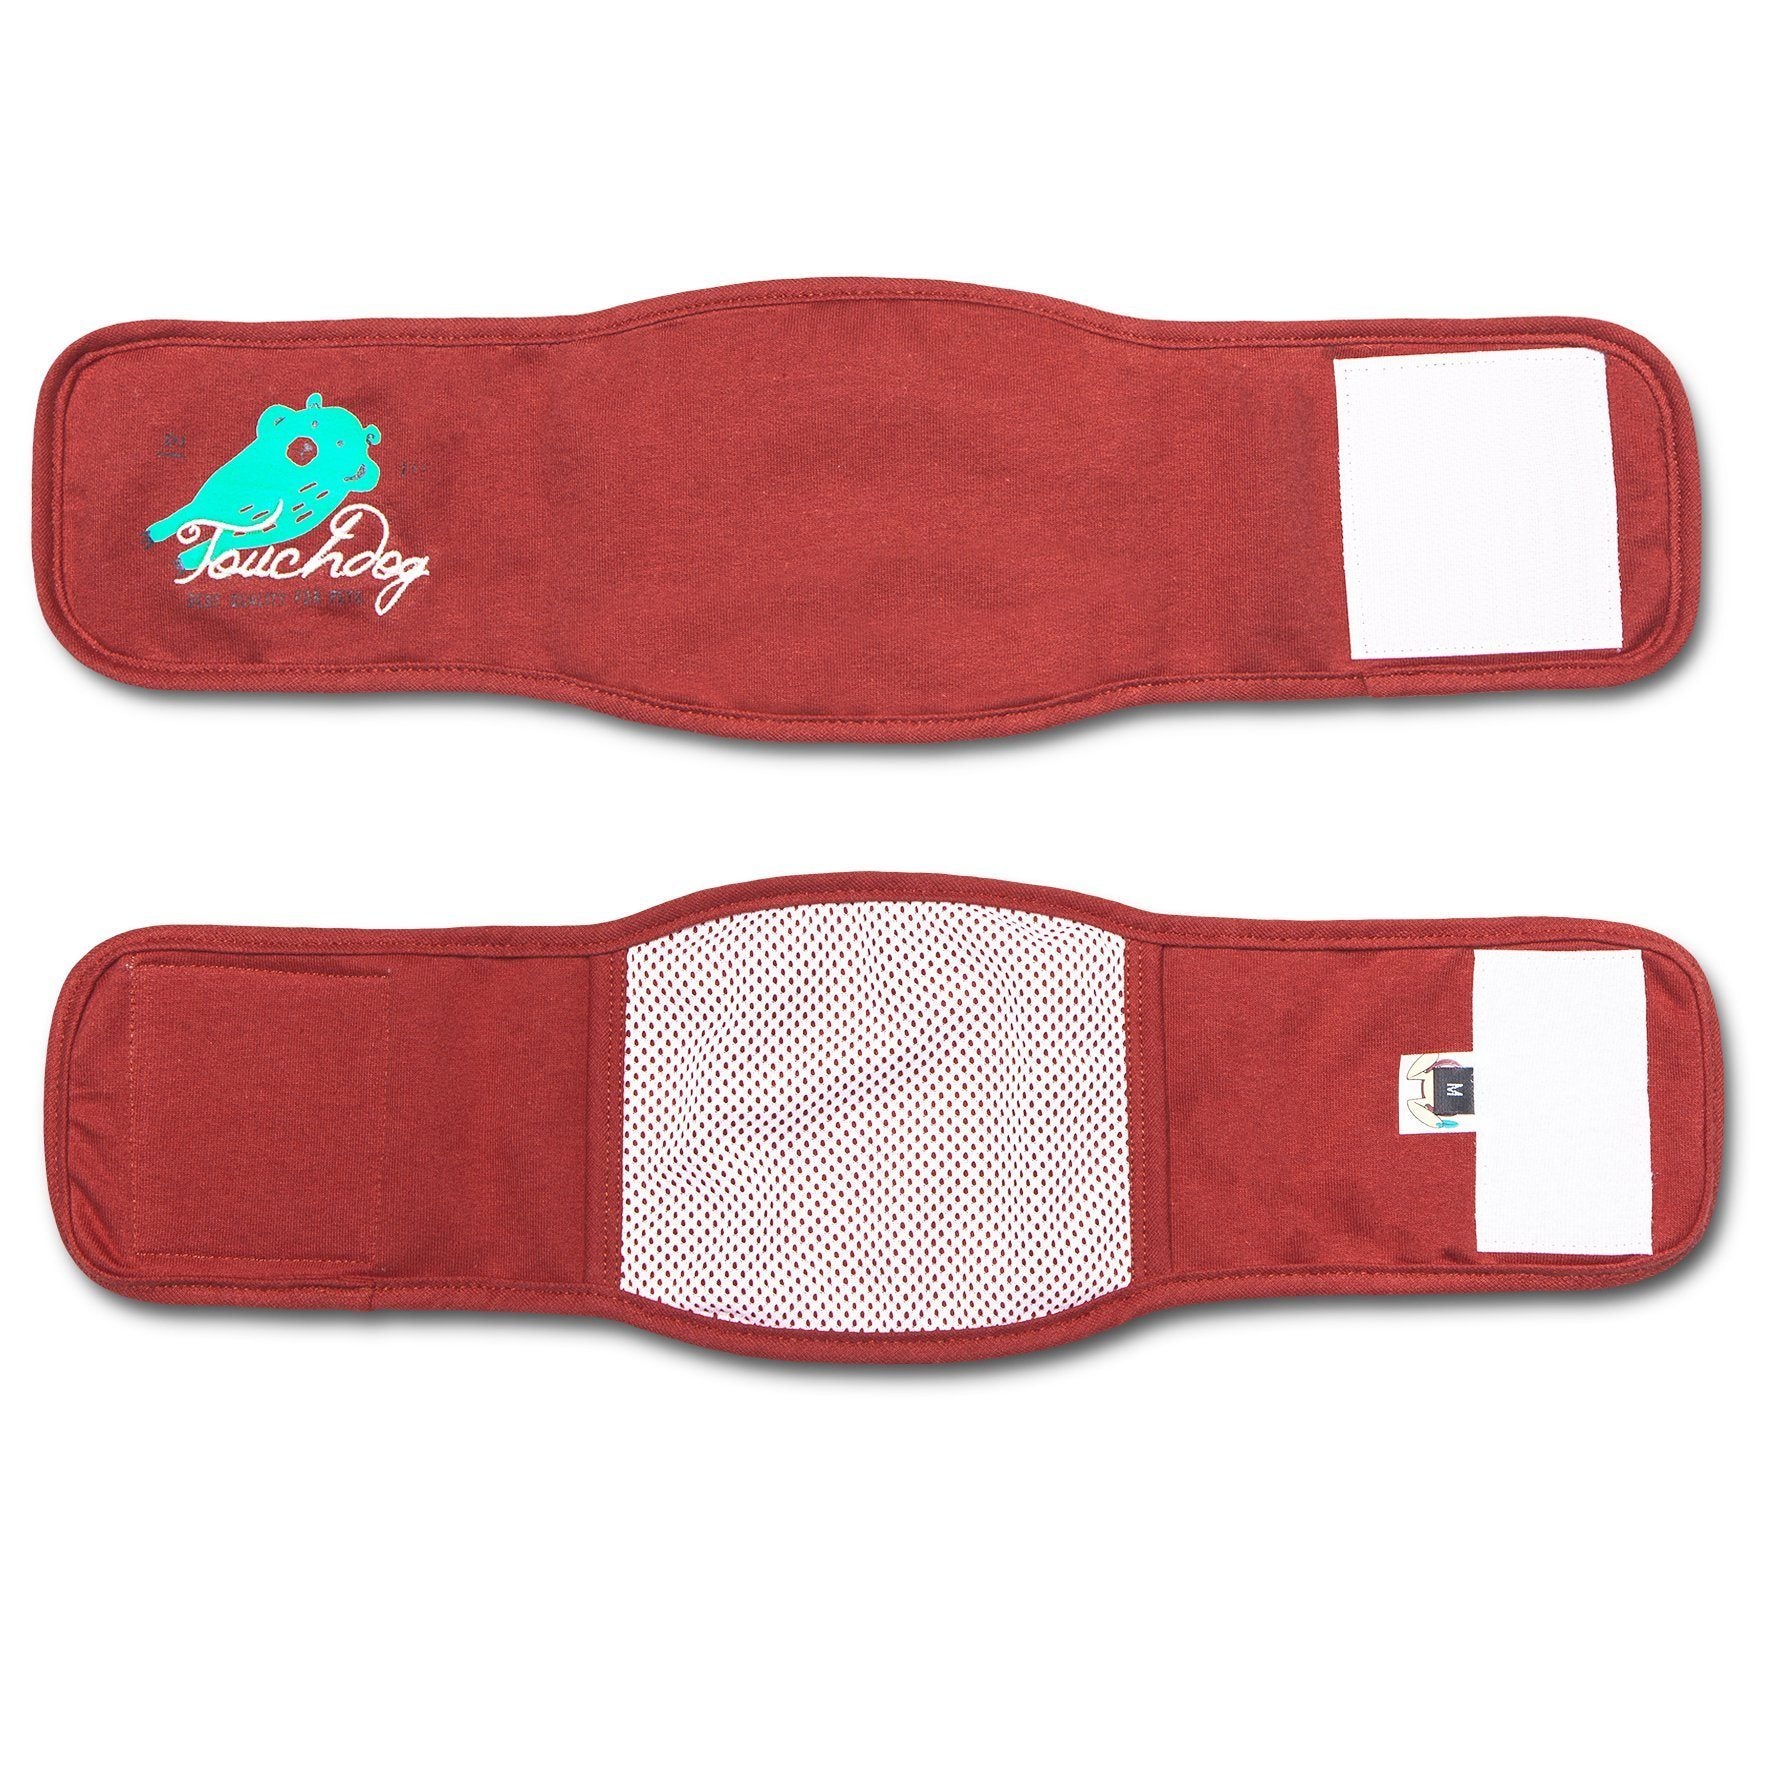 Touchdog Gauze-Aid Protective Dog Bandage and Calming Compression Sleeve  